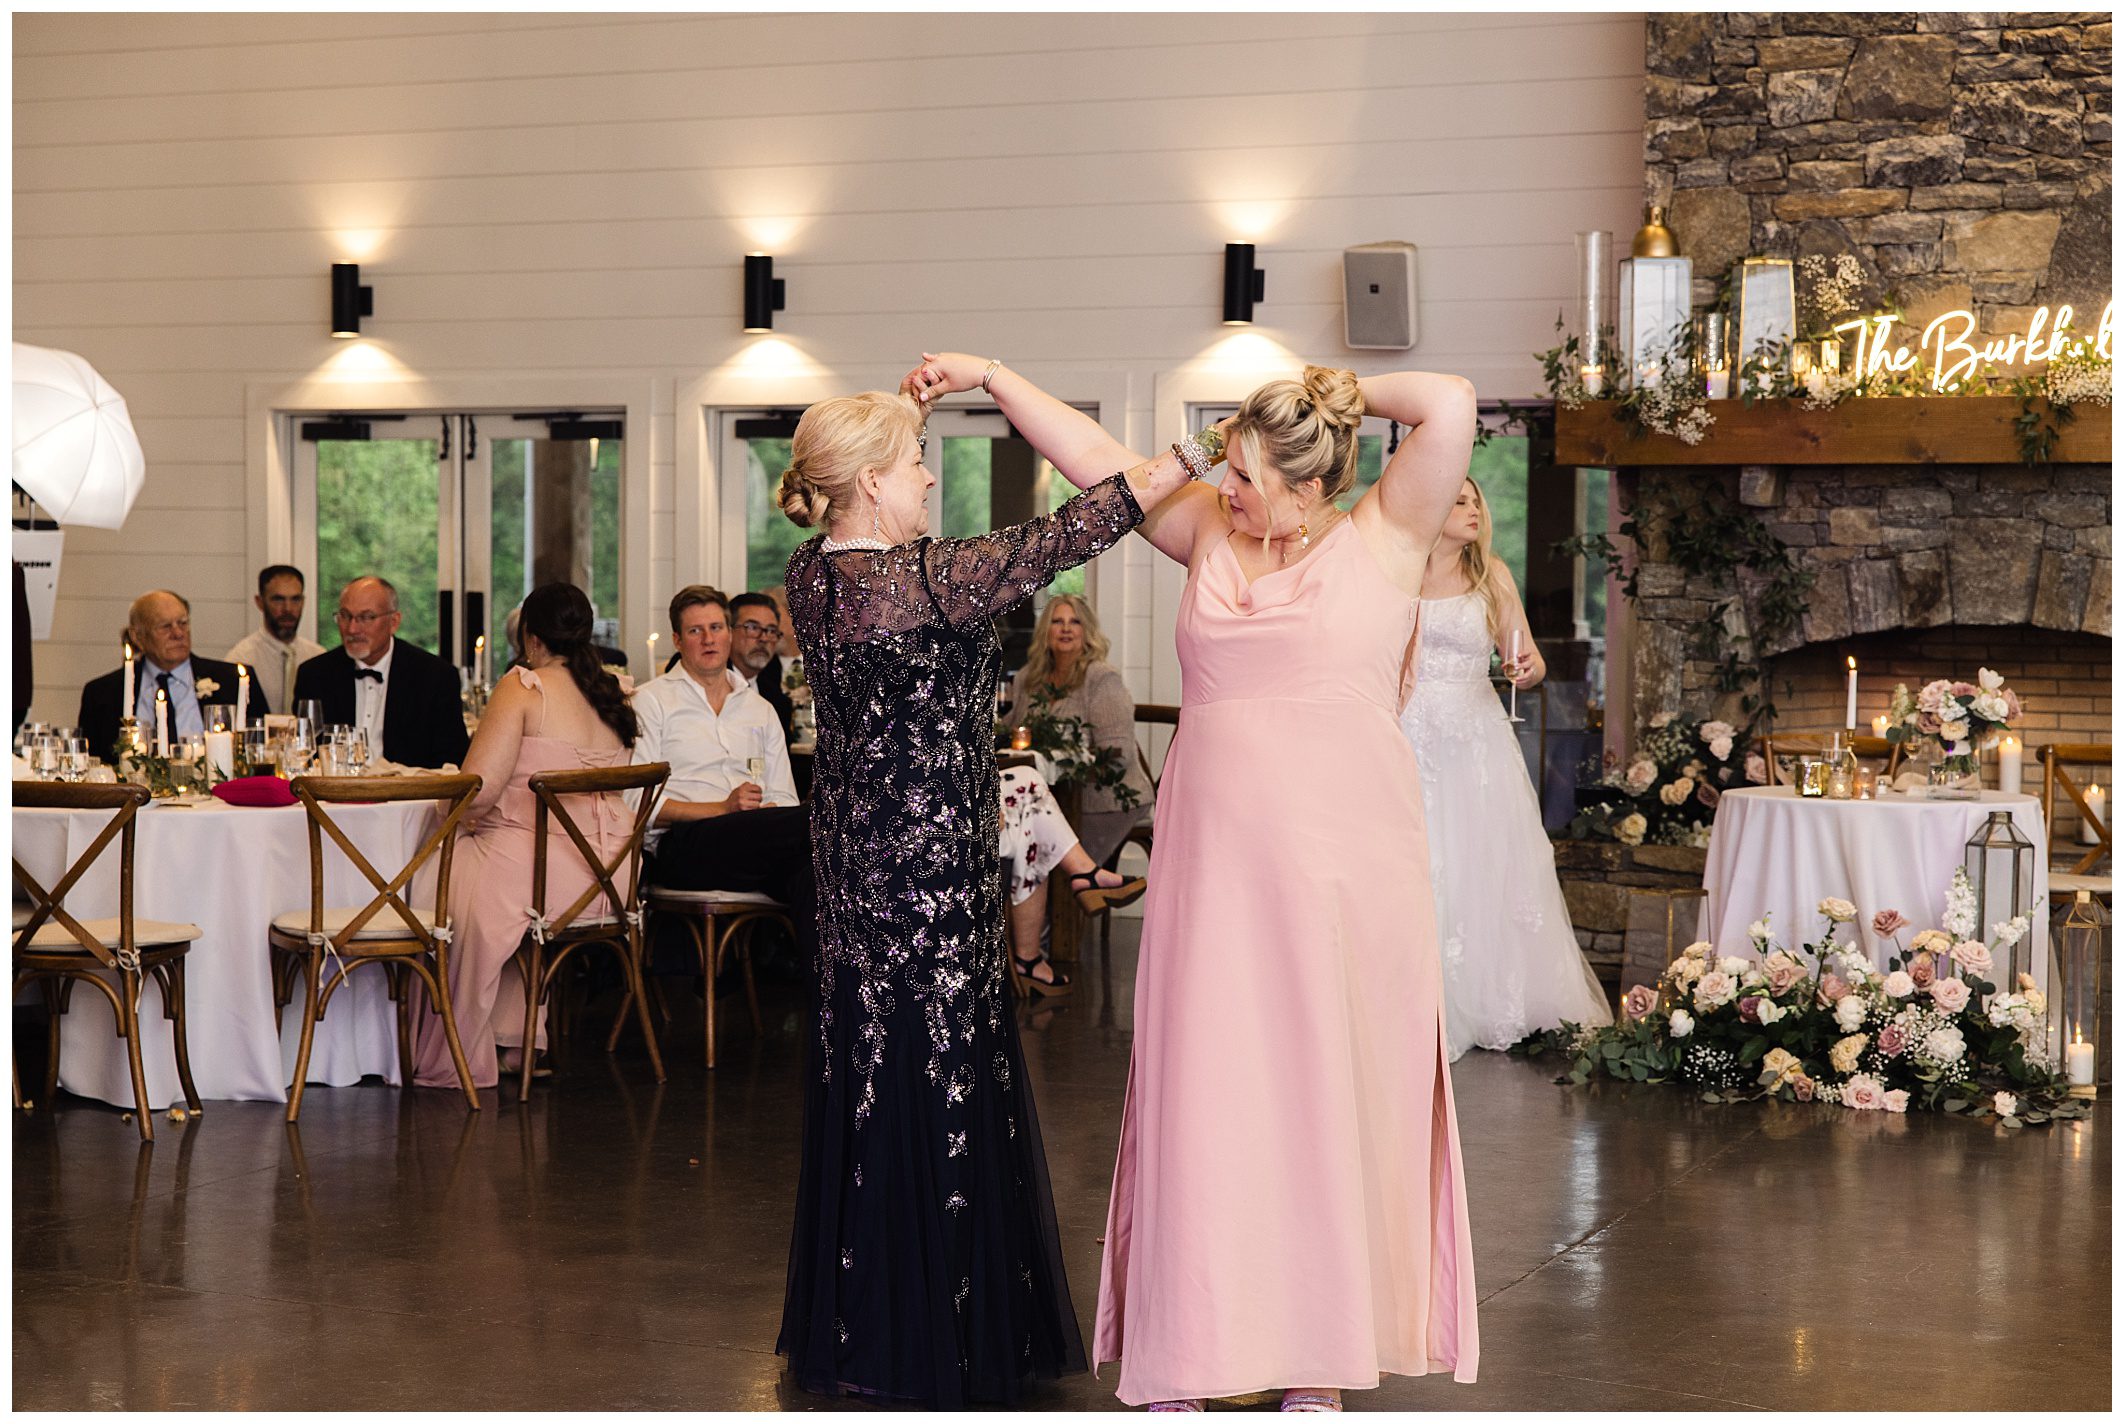 Two women dancing joyfully together at a mountain wedding reception, with guests seated at tables in the background.